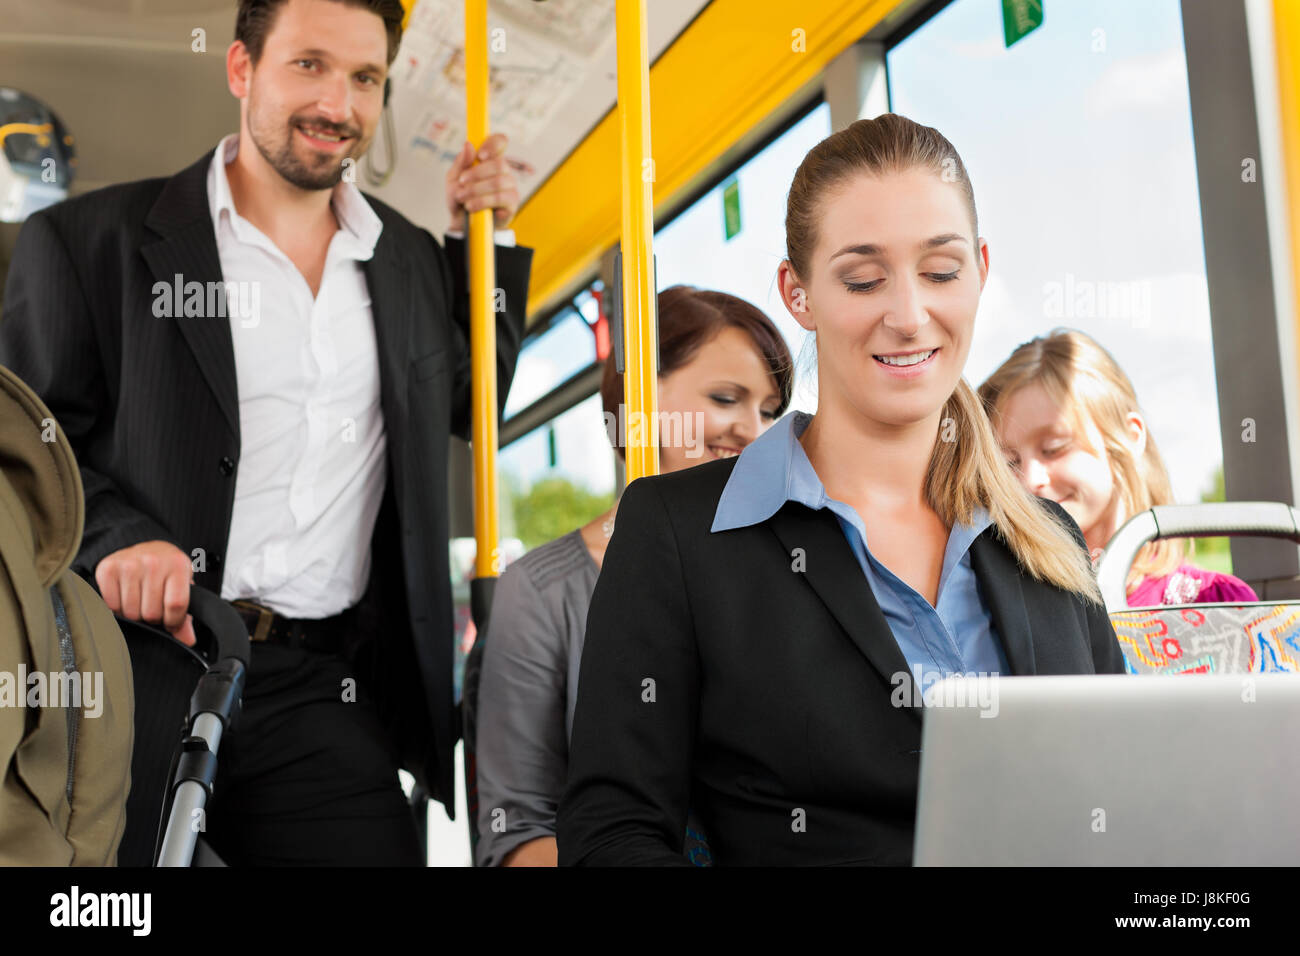 woman, drive, passenger, commuter, daddies, fathers, ferries, vehicle, means of Stock Photo